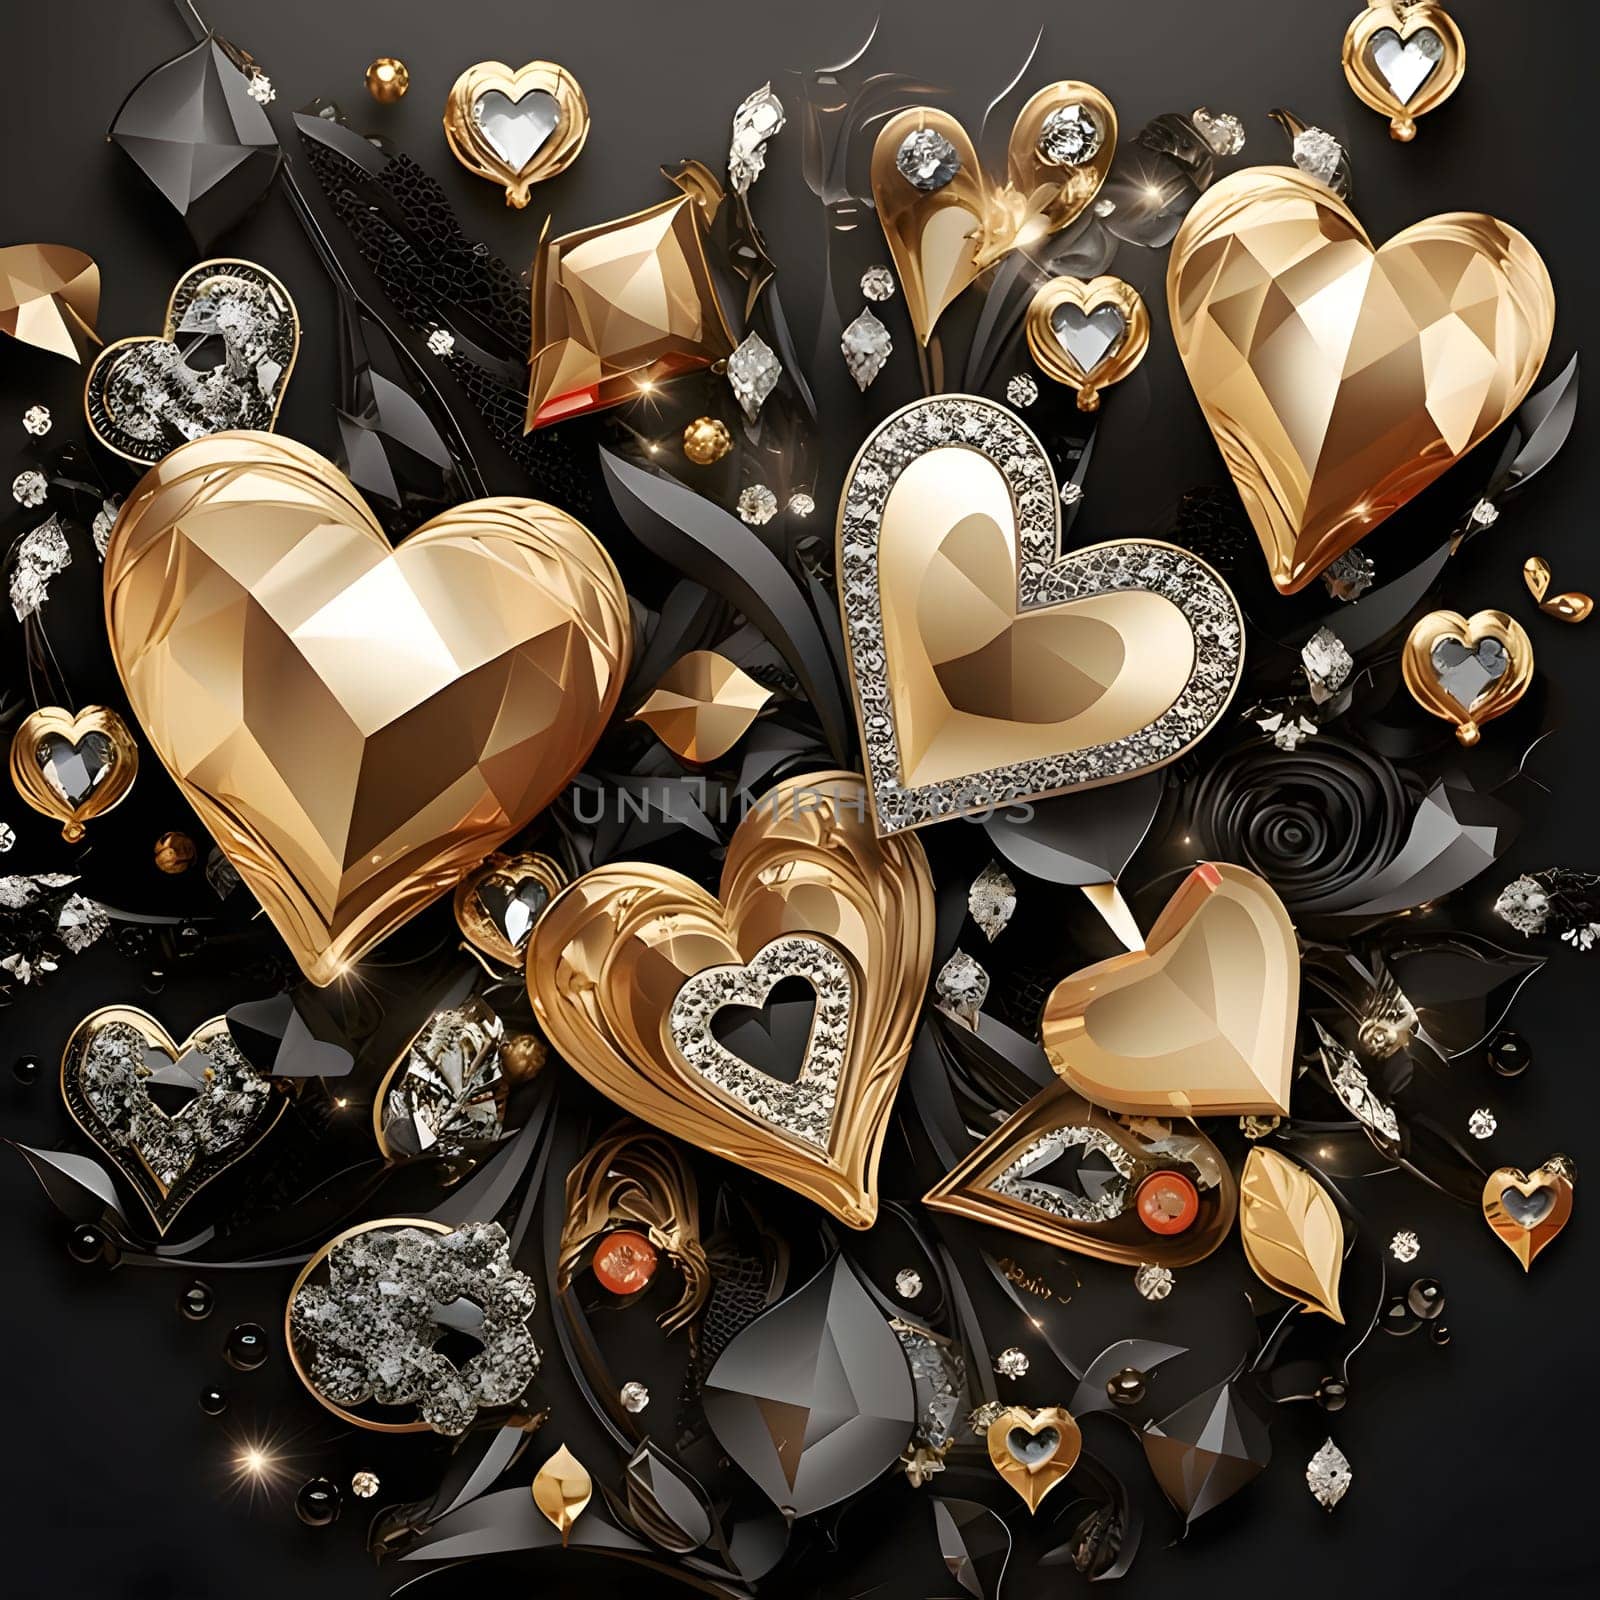 Top view of gold and silver various kinds of hearts, diamonds, jewels. Heart as a symbol of affection and love. The time of falling in love and love.